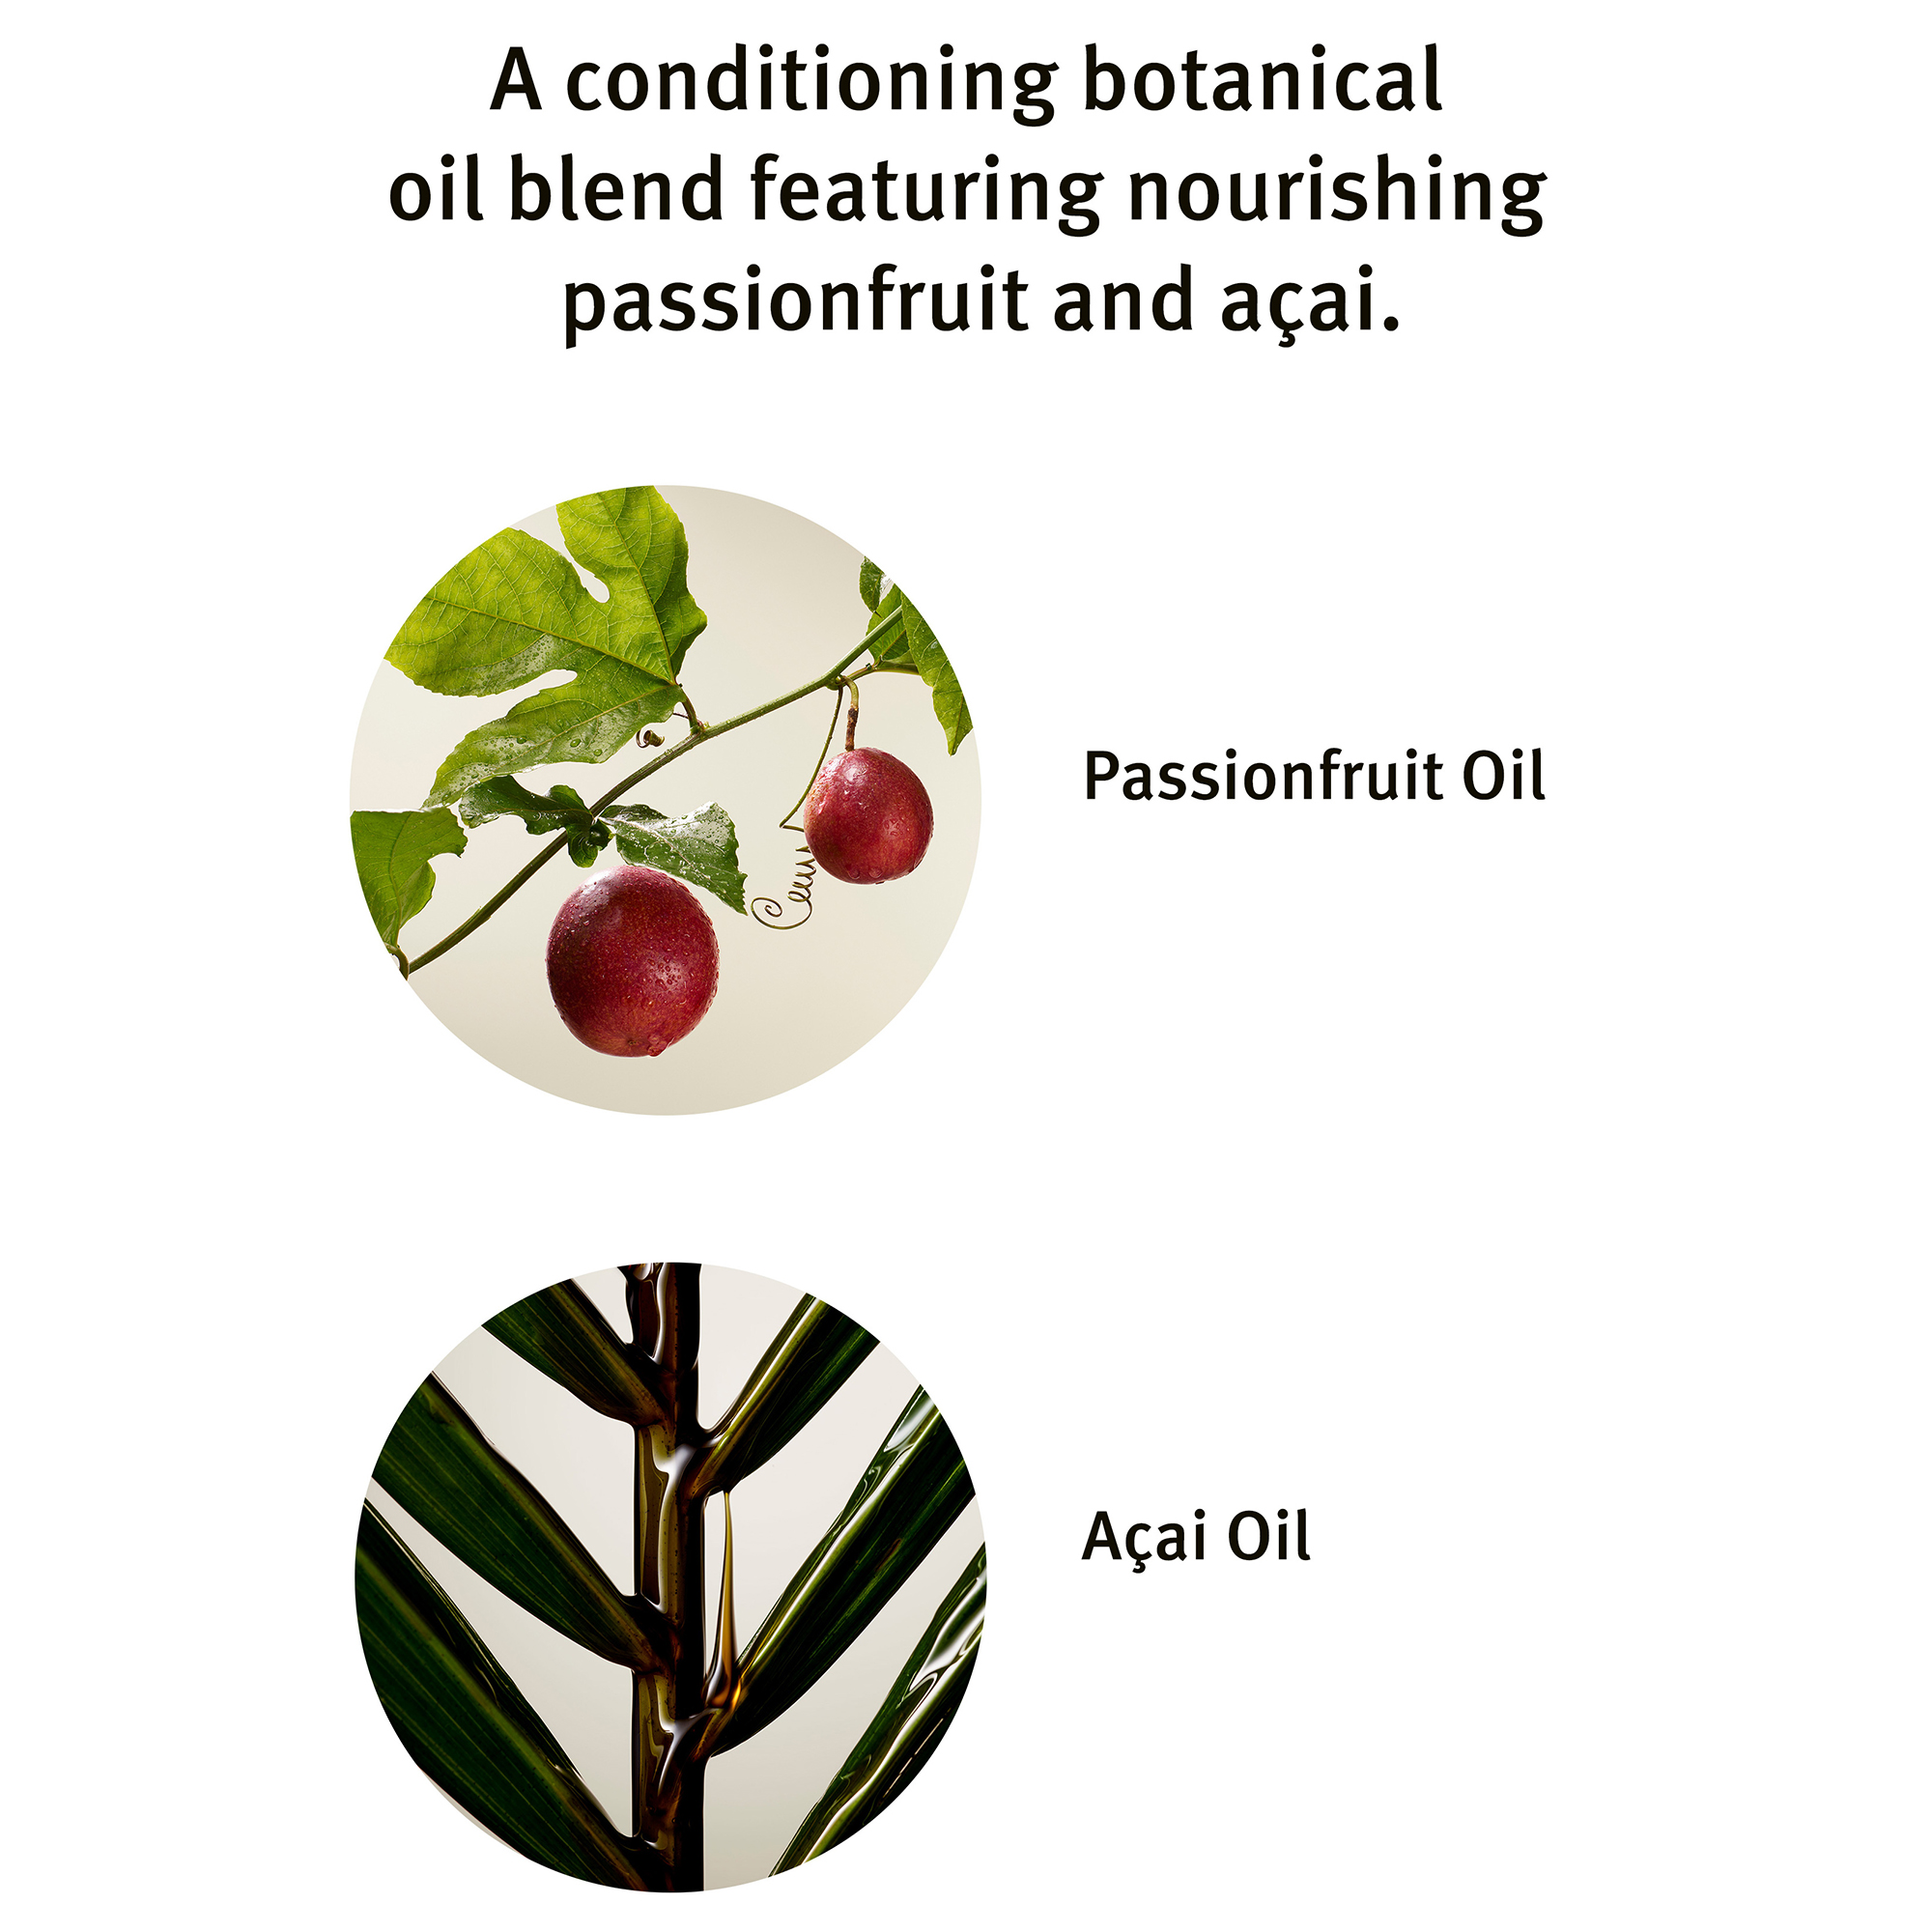 A conditioning botanical oil blend featuring nourishing passionfruit and acai